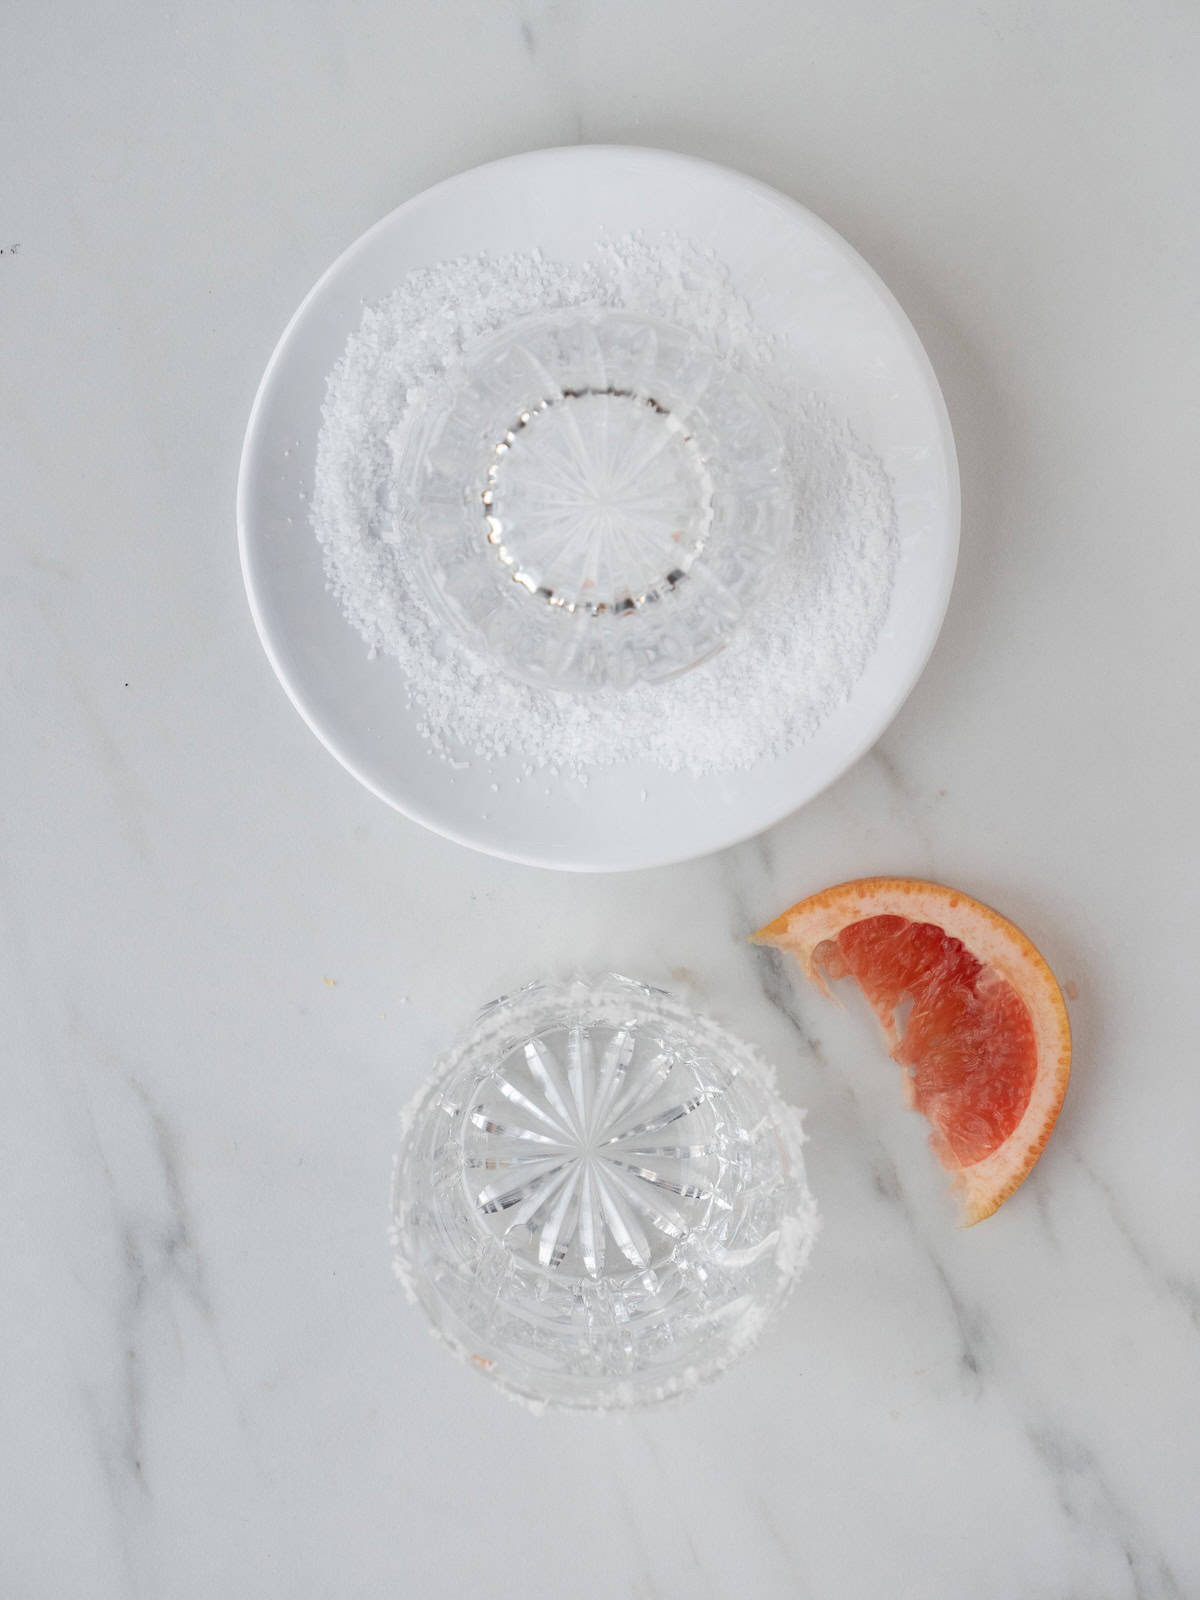 A small plate with salt, and a cocktail glass rim being dipped in it to salt its rim, with a grapefruit wedge and another salted rim cocktail glass on the side.